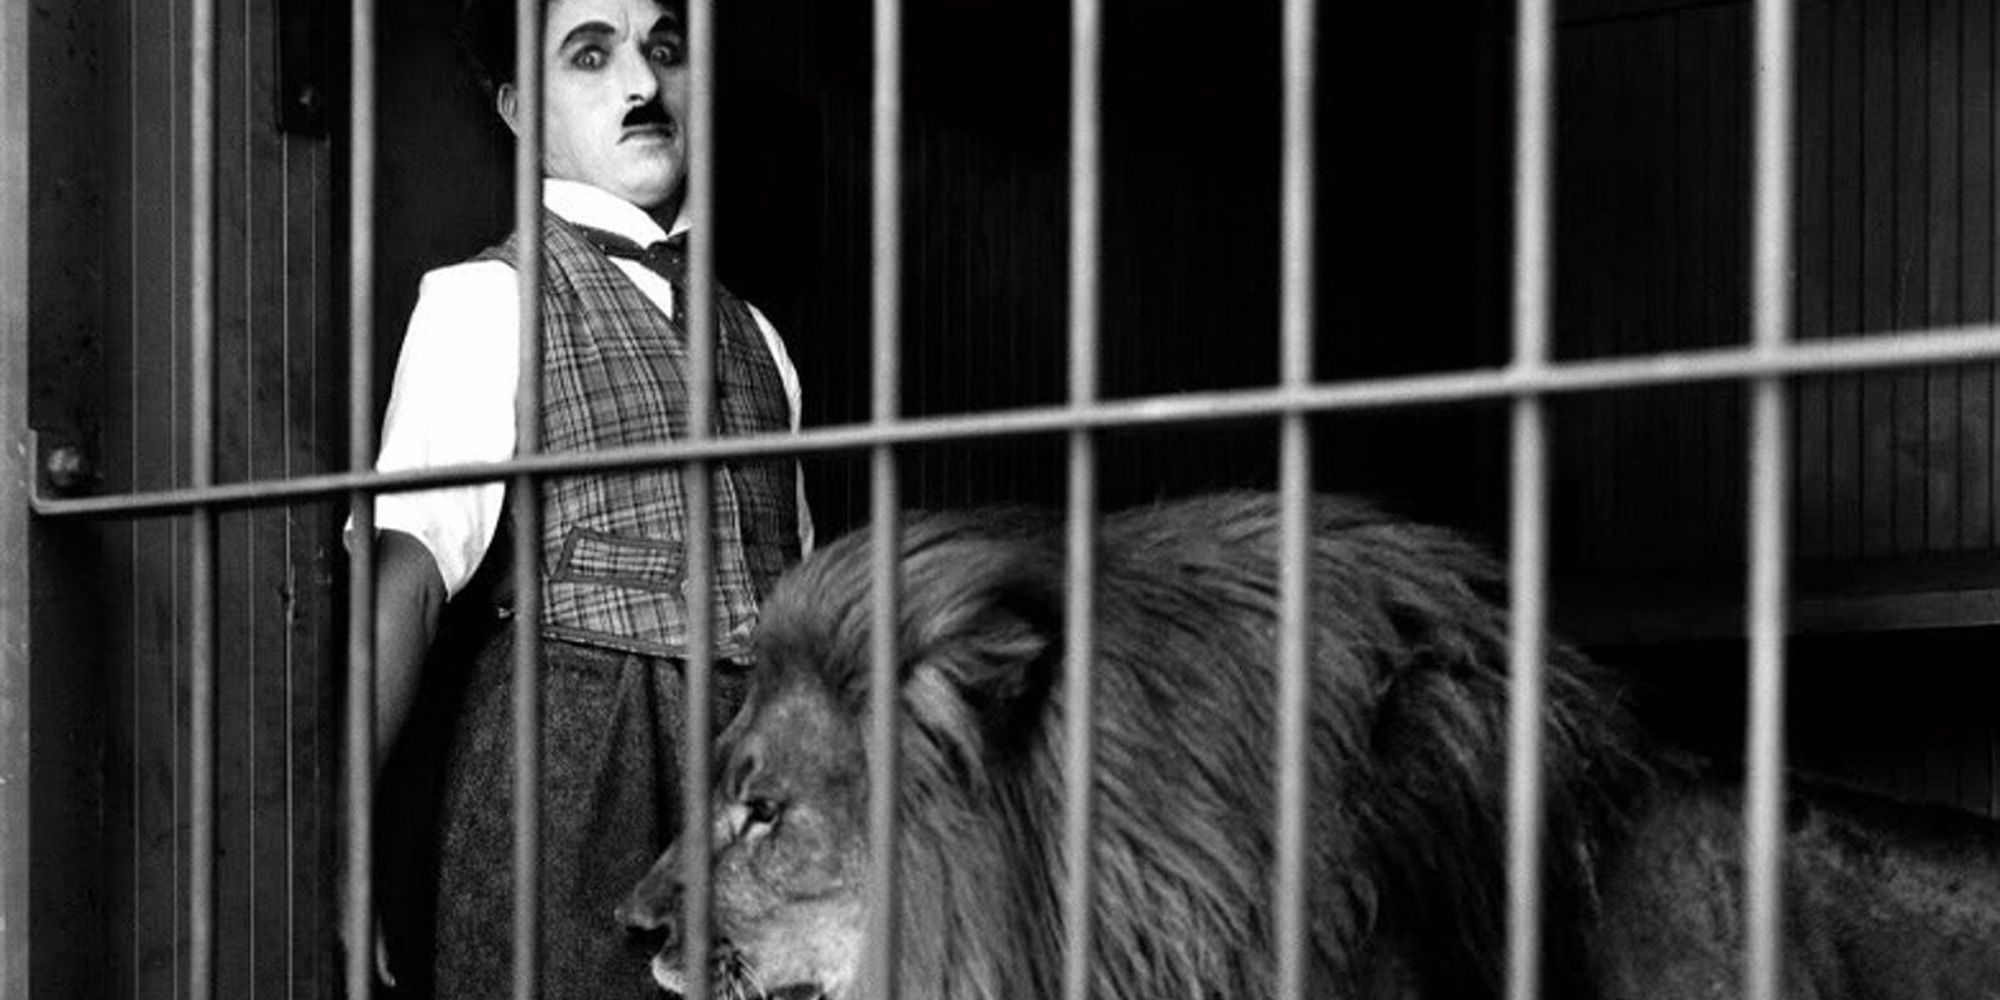 The Tramp trapped with a lion in its cage